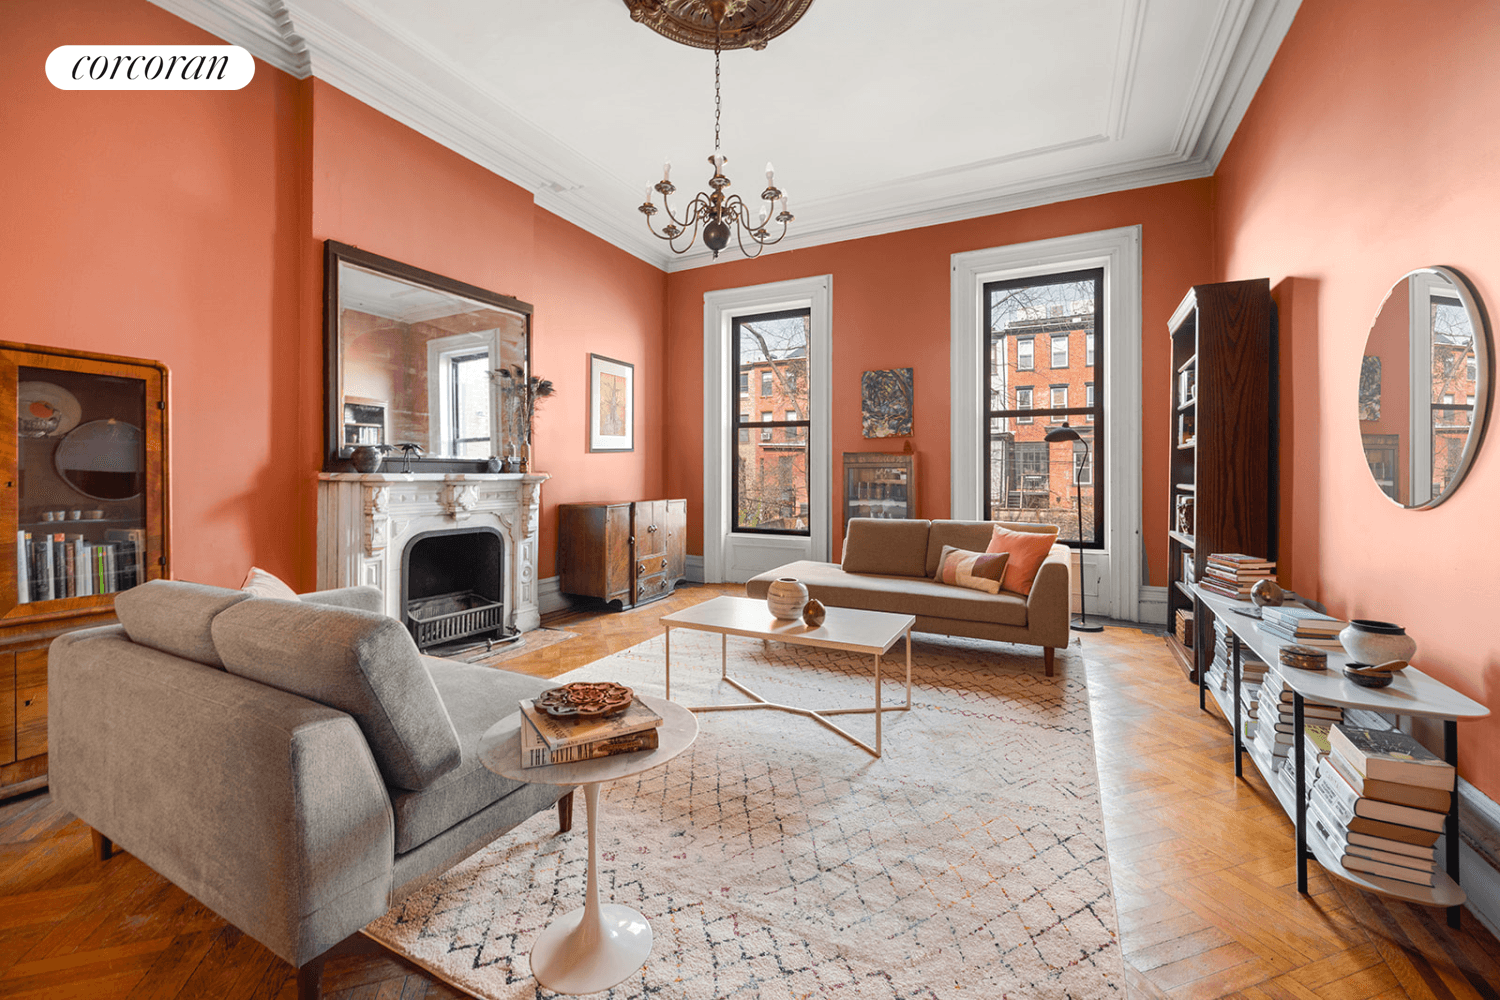 Open Houses are By Appointment Only please schedule with the Corcoran Listing agent Open House Sunday 4 14 from 11 00am 12 00pm by appointment onlyRARE GEM IN PARK SLOPE ...